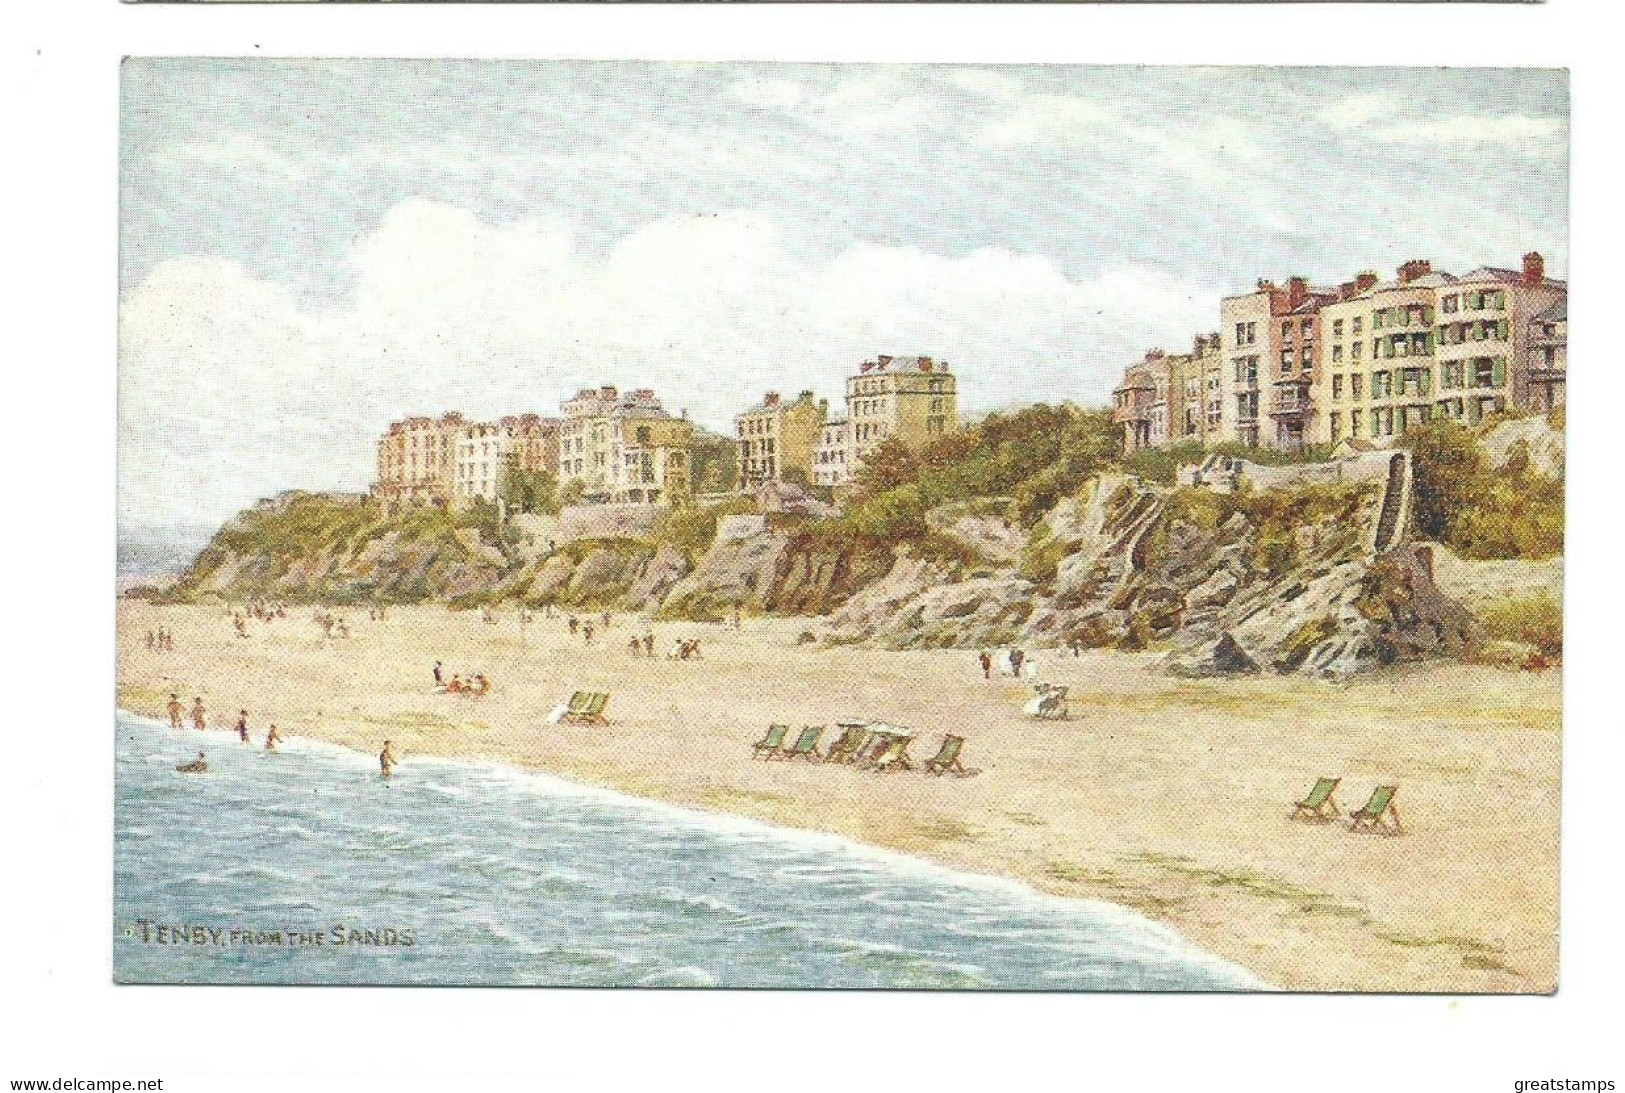 Postcard Wales Pembrokeshire Artist  Impression Salmon Tenby From The Sands  Unused - Pembrokeshire